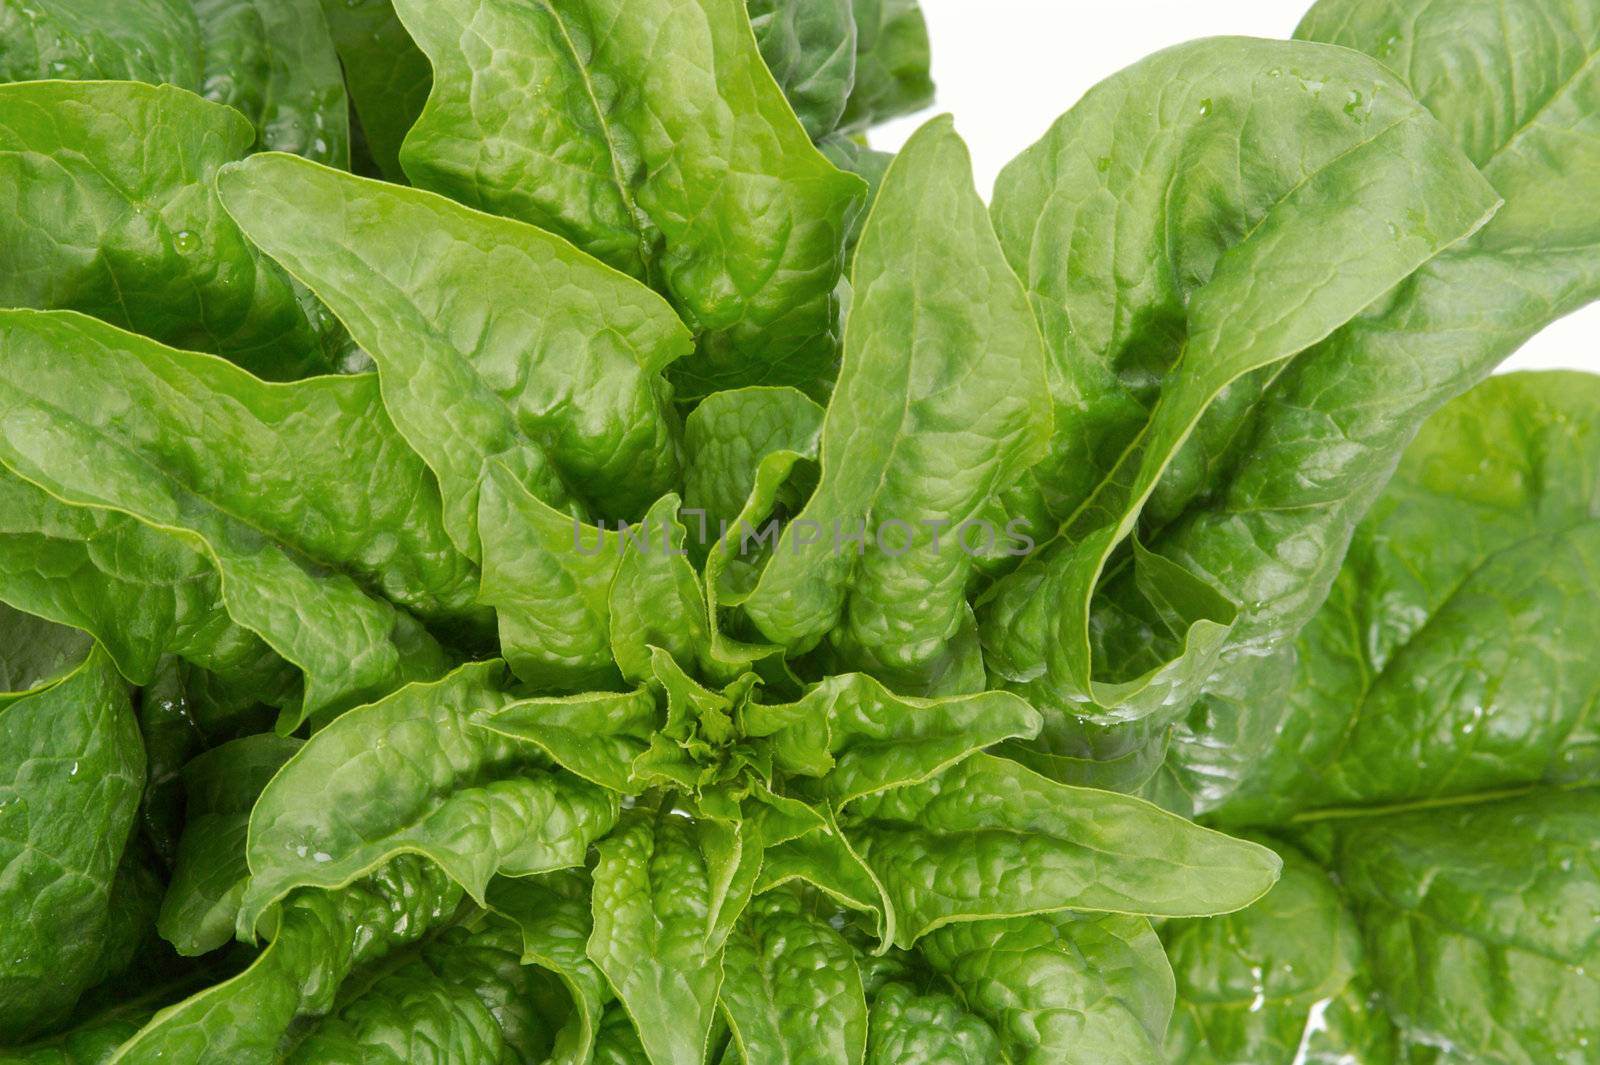 Sample of spinach on a white background